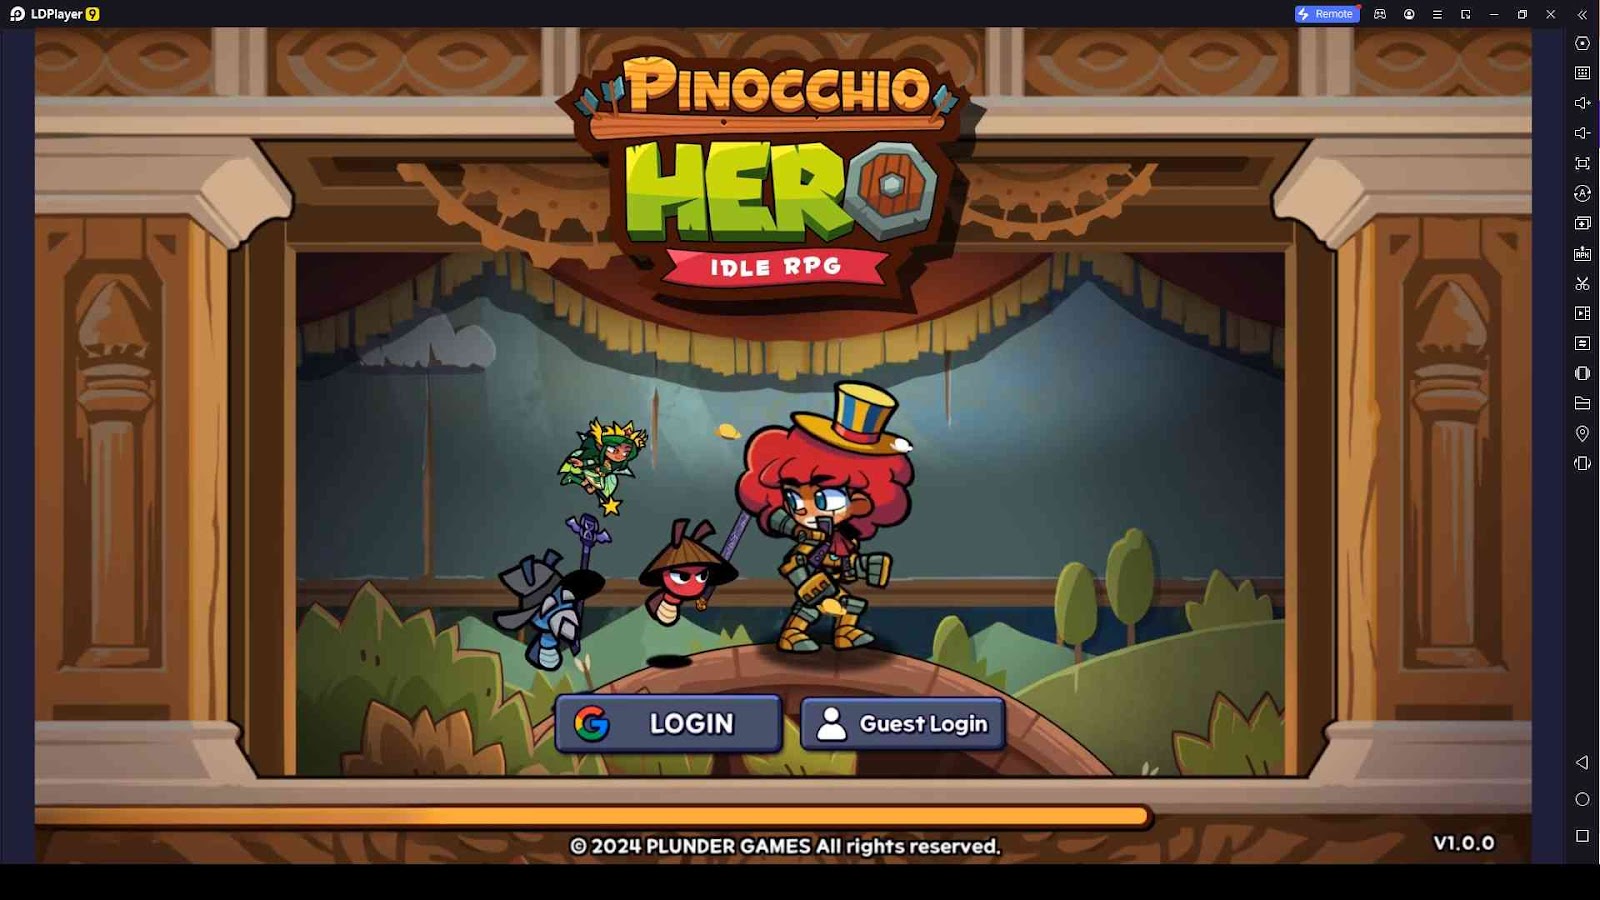 A Beginner's Guide and Tips to Pinocchio Hero IDLE RPG